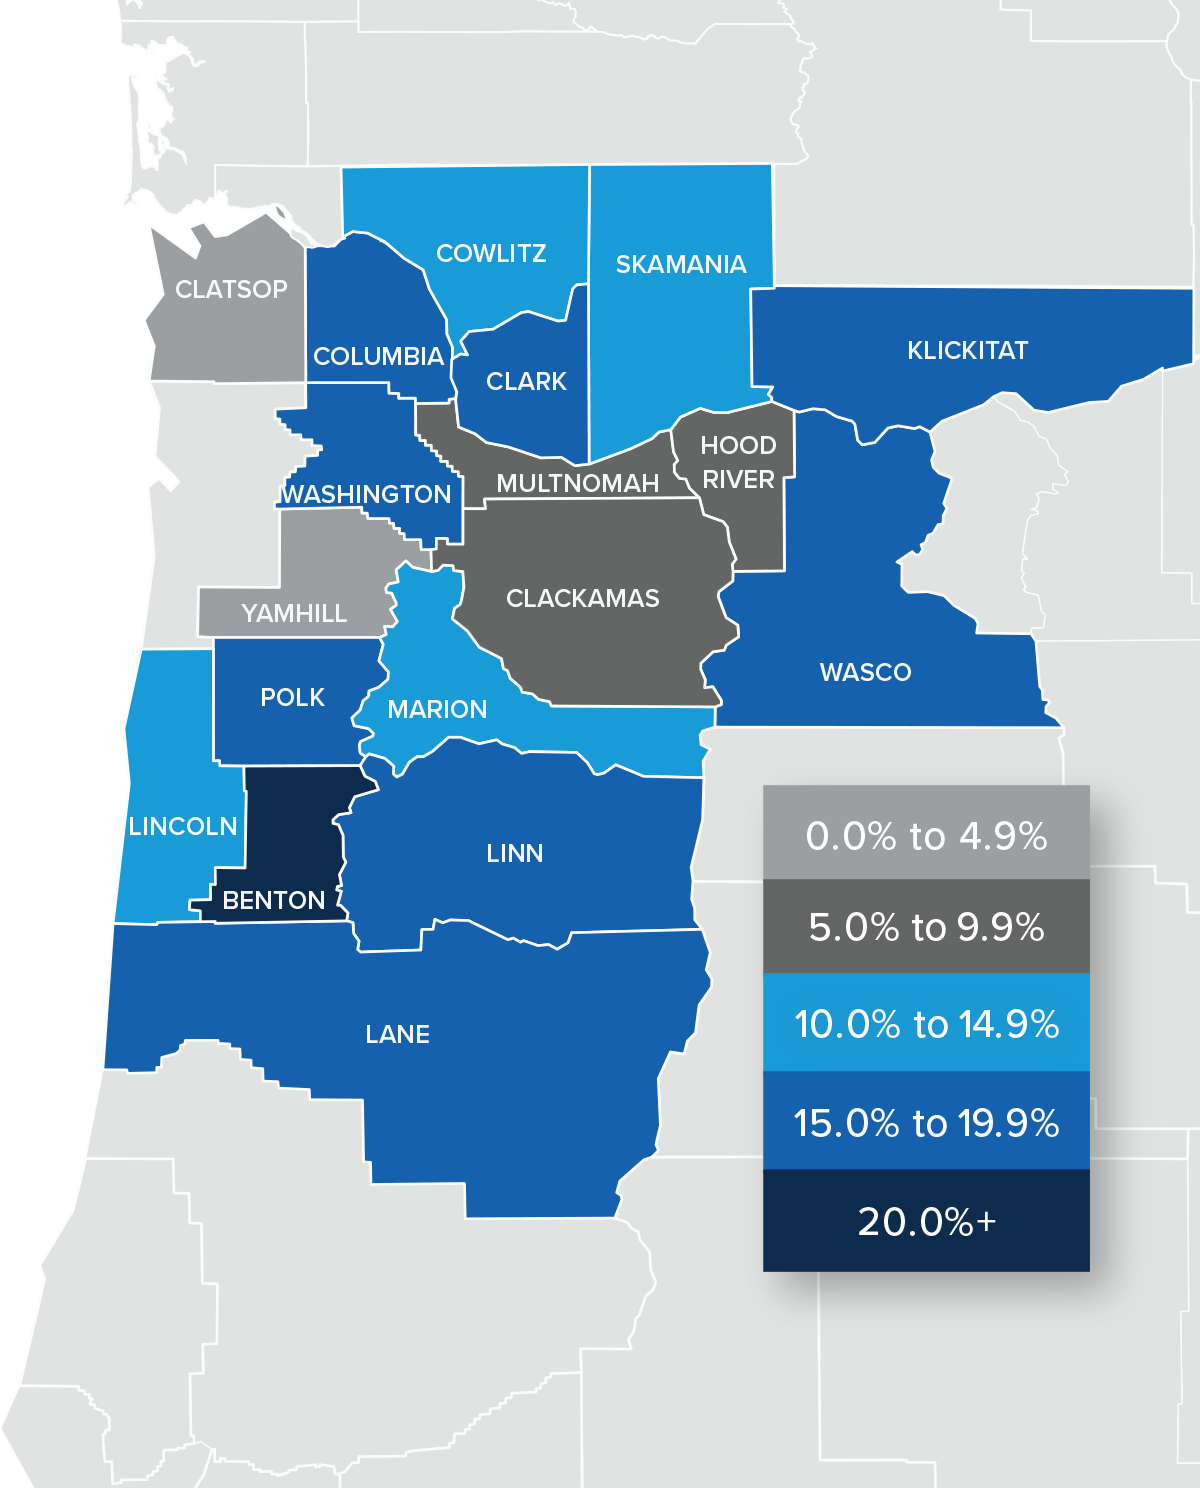 A map showing the real estate home prices percentage changes for various counties in Northwest Oregon and Southwest Washington. Different colors correspond to different tiers of percentage change. Clatsop and Yam Hill Counties are the only county with a percentage change in the 0% to 4.9% range, Hood River, Multnomah, and Clackamas counties are in the 5% to 9.9% change range, Marion, Lincoln, Cowlitz, and Skamania are in the 10% to 14.9% change range, Columbia, Clark, Washington, Polk, Linn, Lane, Wasco, and Klickitat counties are in the 15% to 19.9% change range, and Benton county is the sole county in the 20% + change range.